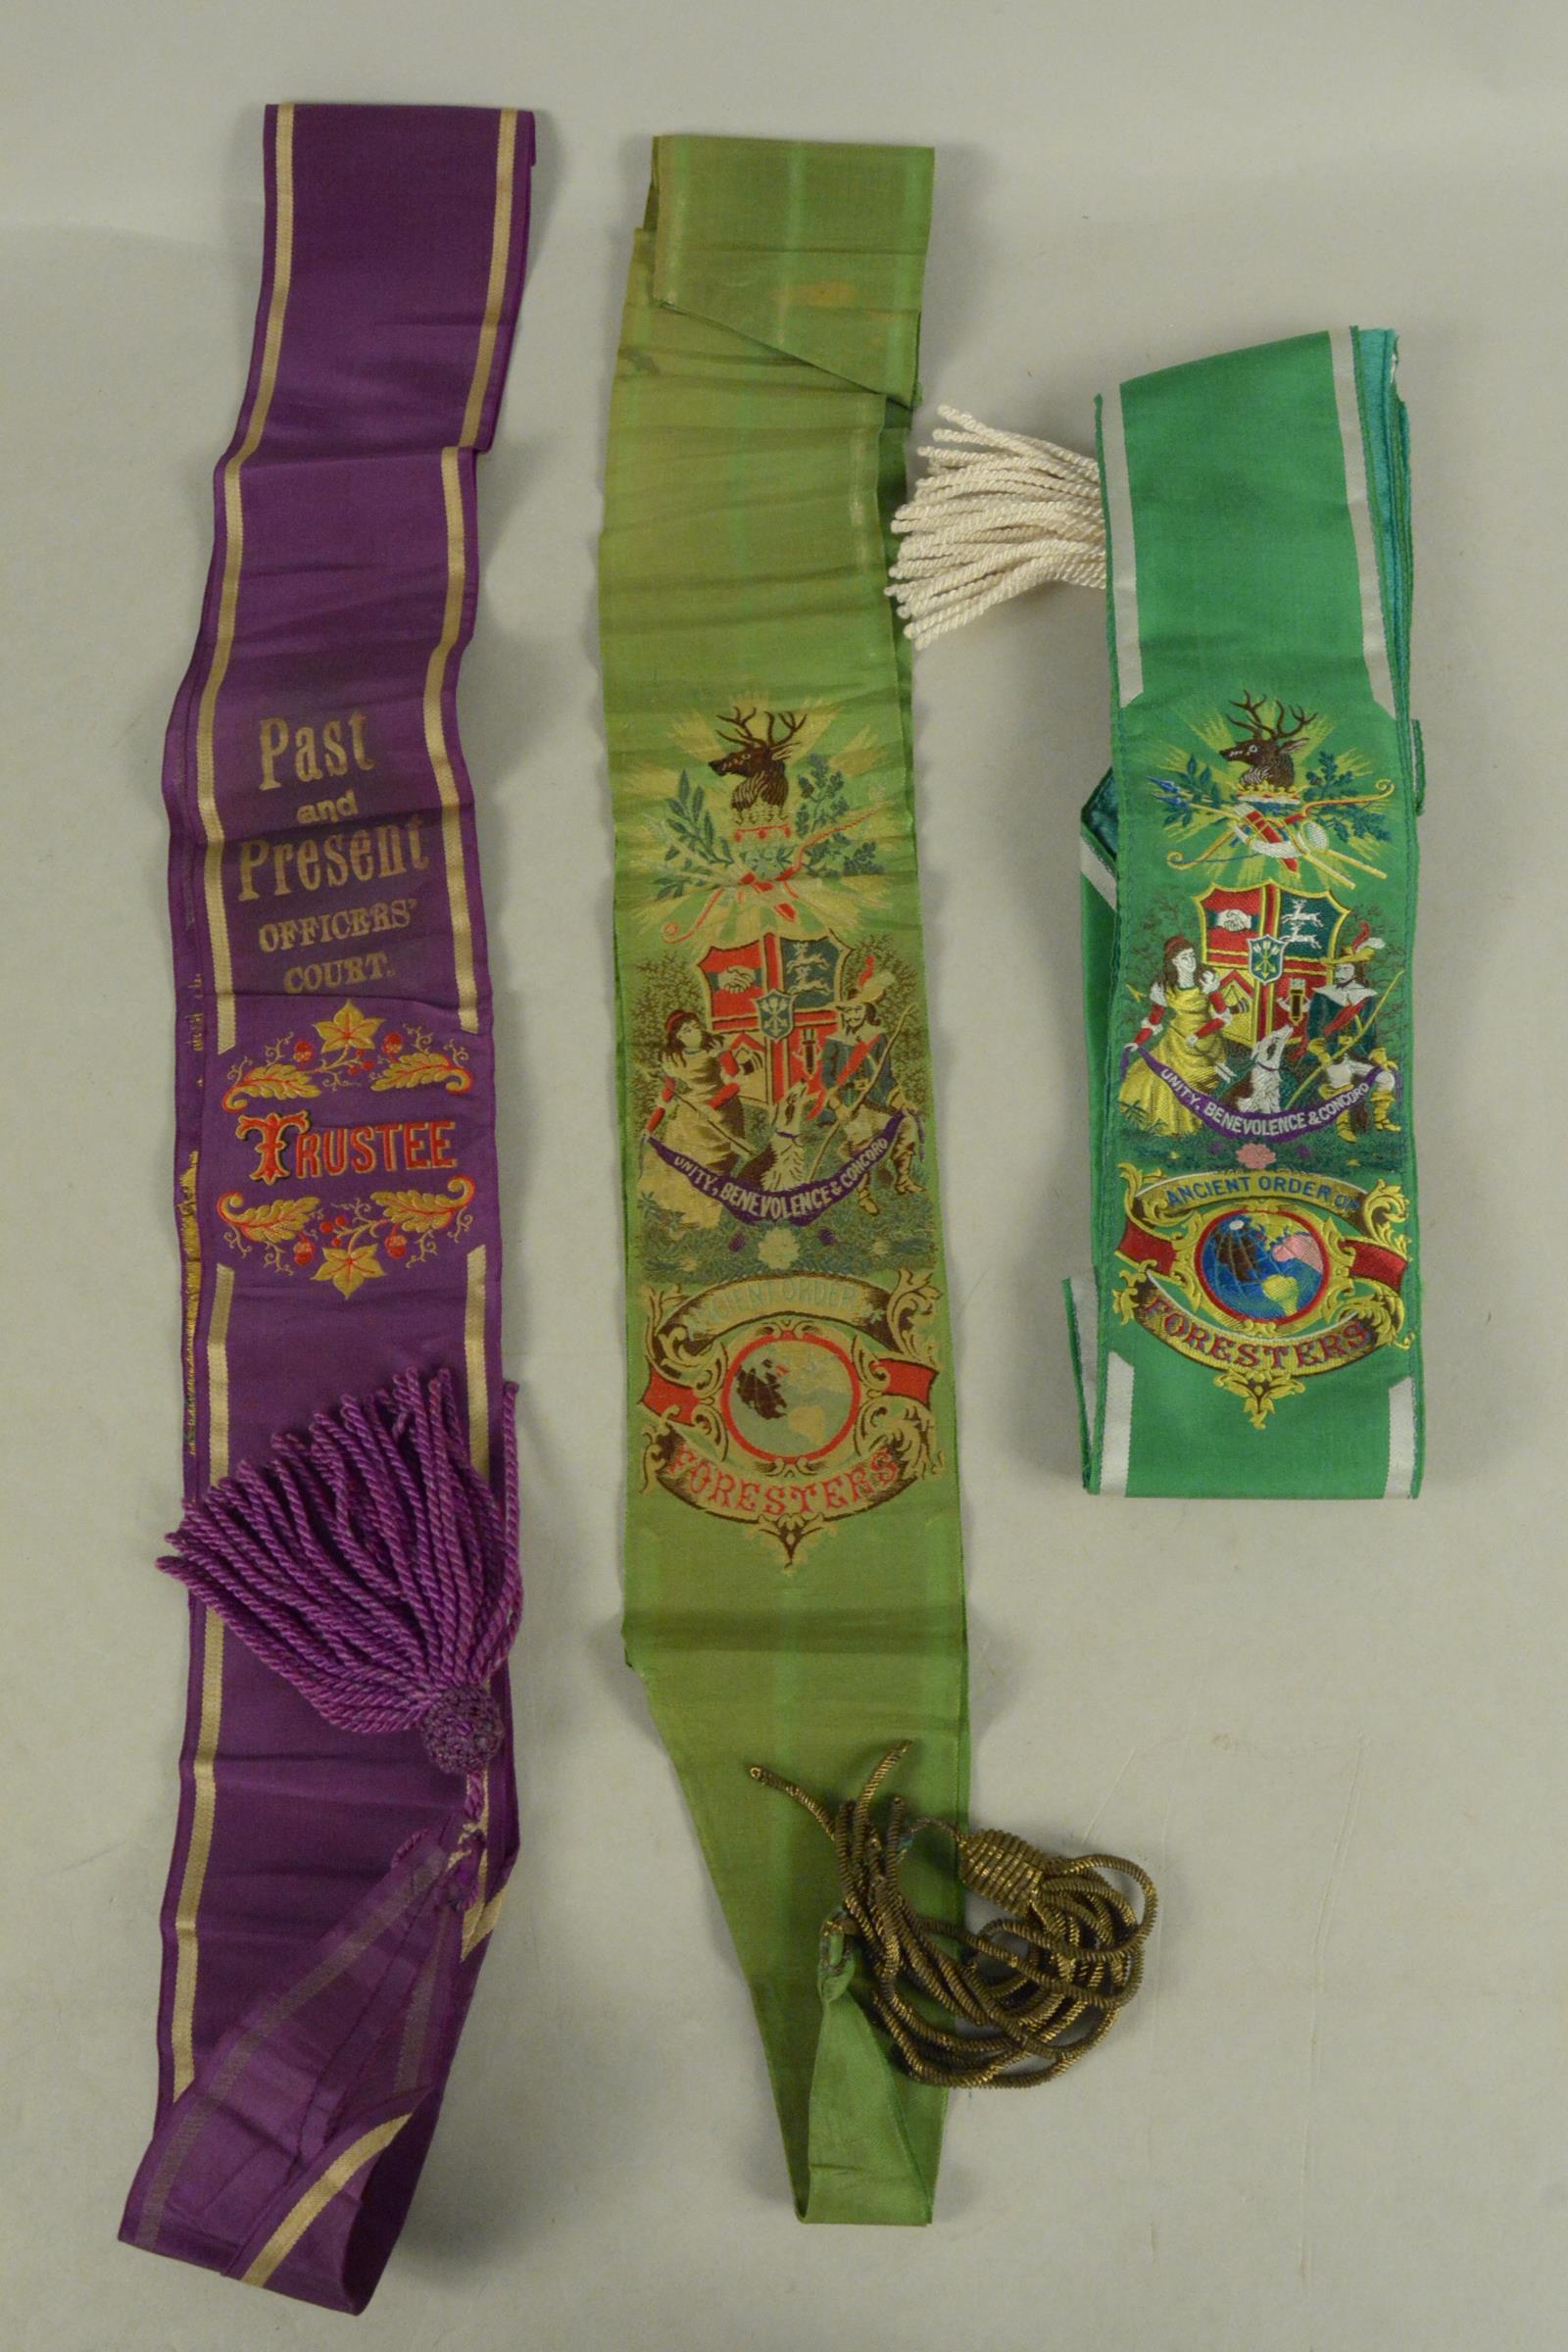 Eleven vintage Ancient Order of Foresters badges, countrywide lodges, - Image 3 of 3